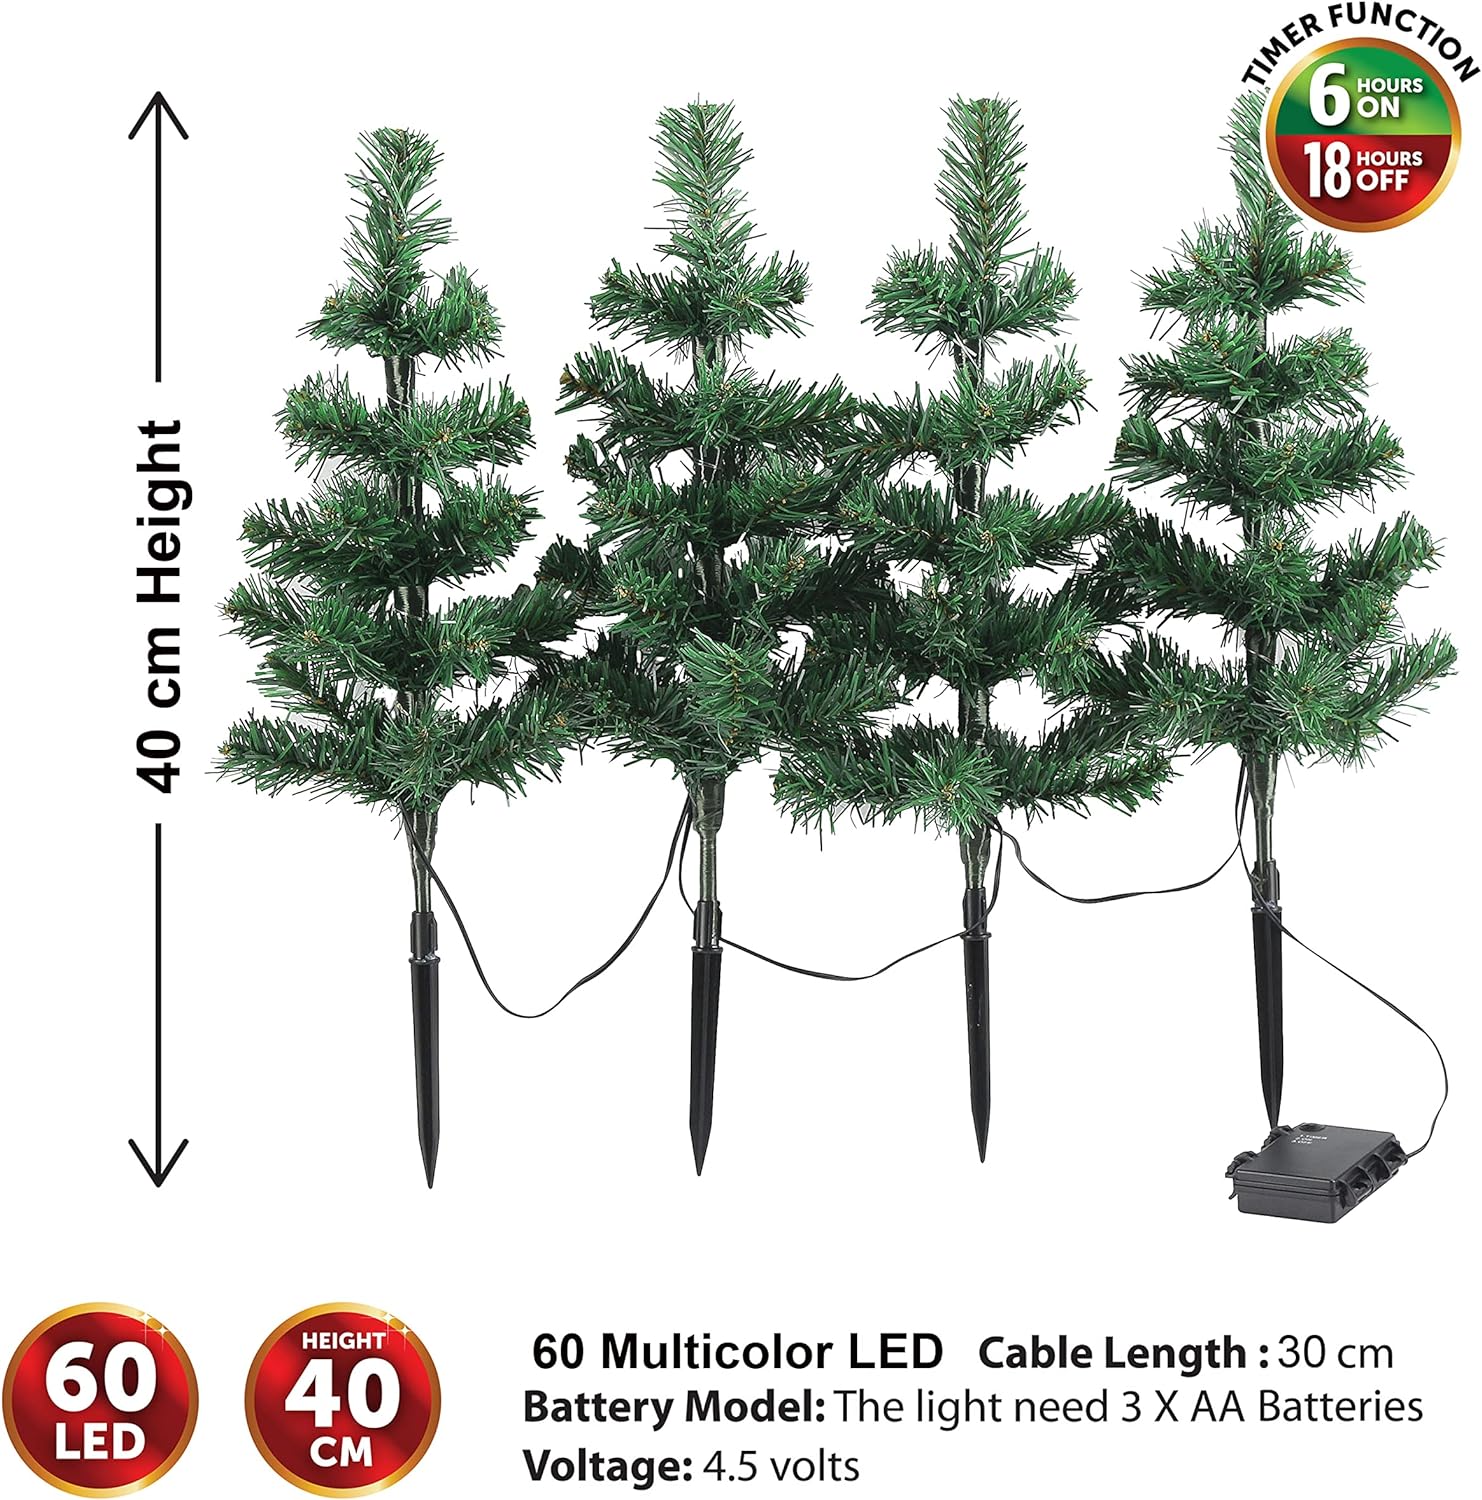 Almineez 4 x Christmas Tree Pre-Lit 60 LED Pathway Lights Garden Indoor Outdoor Path Stake Lights Xmas Decorations - Pathfinder Festive Lights with 6 Hour Timer (Warm White LED)